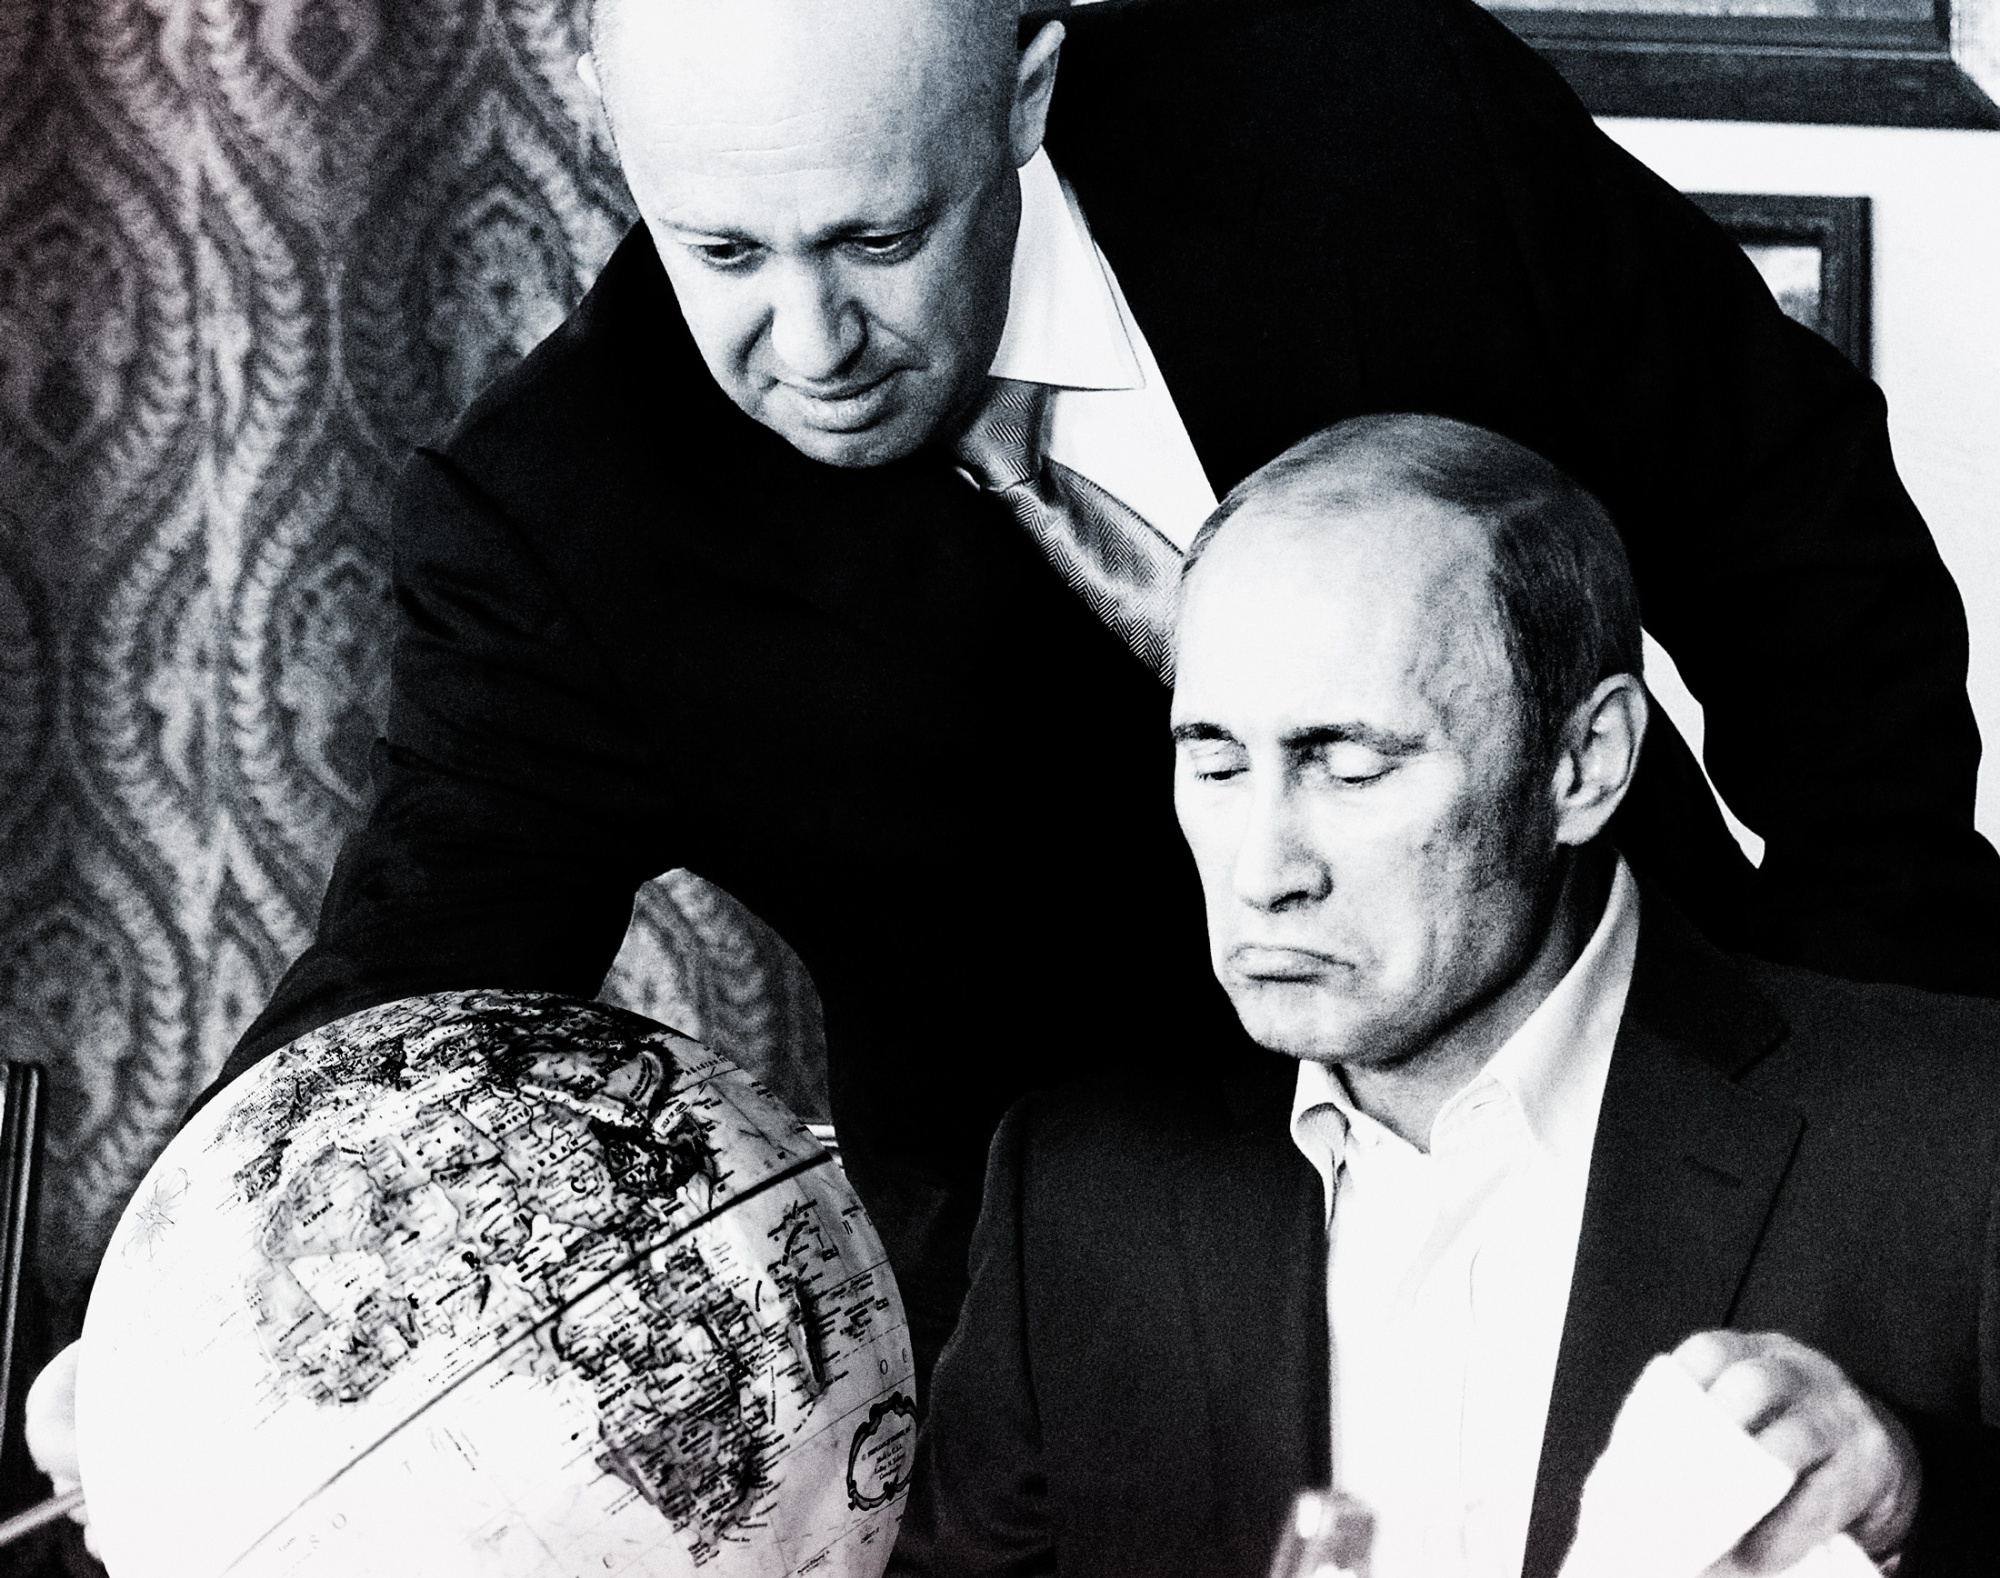 Businessman Yevgeny Prigozhin, known as Putin’s “chef” because of his catering company and ties to the Kremlin, and Vladimir Putin.